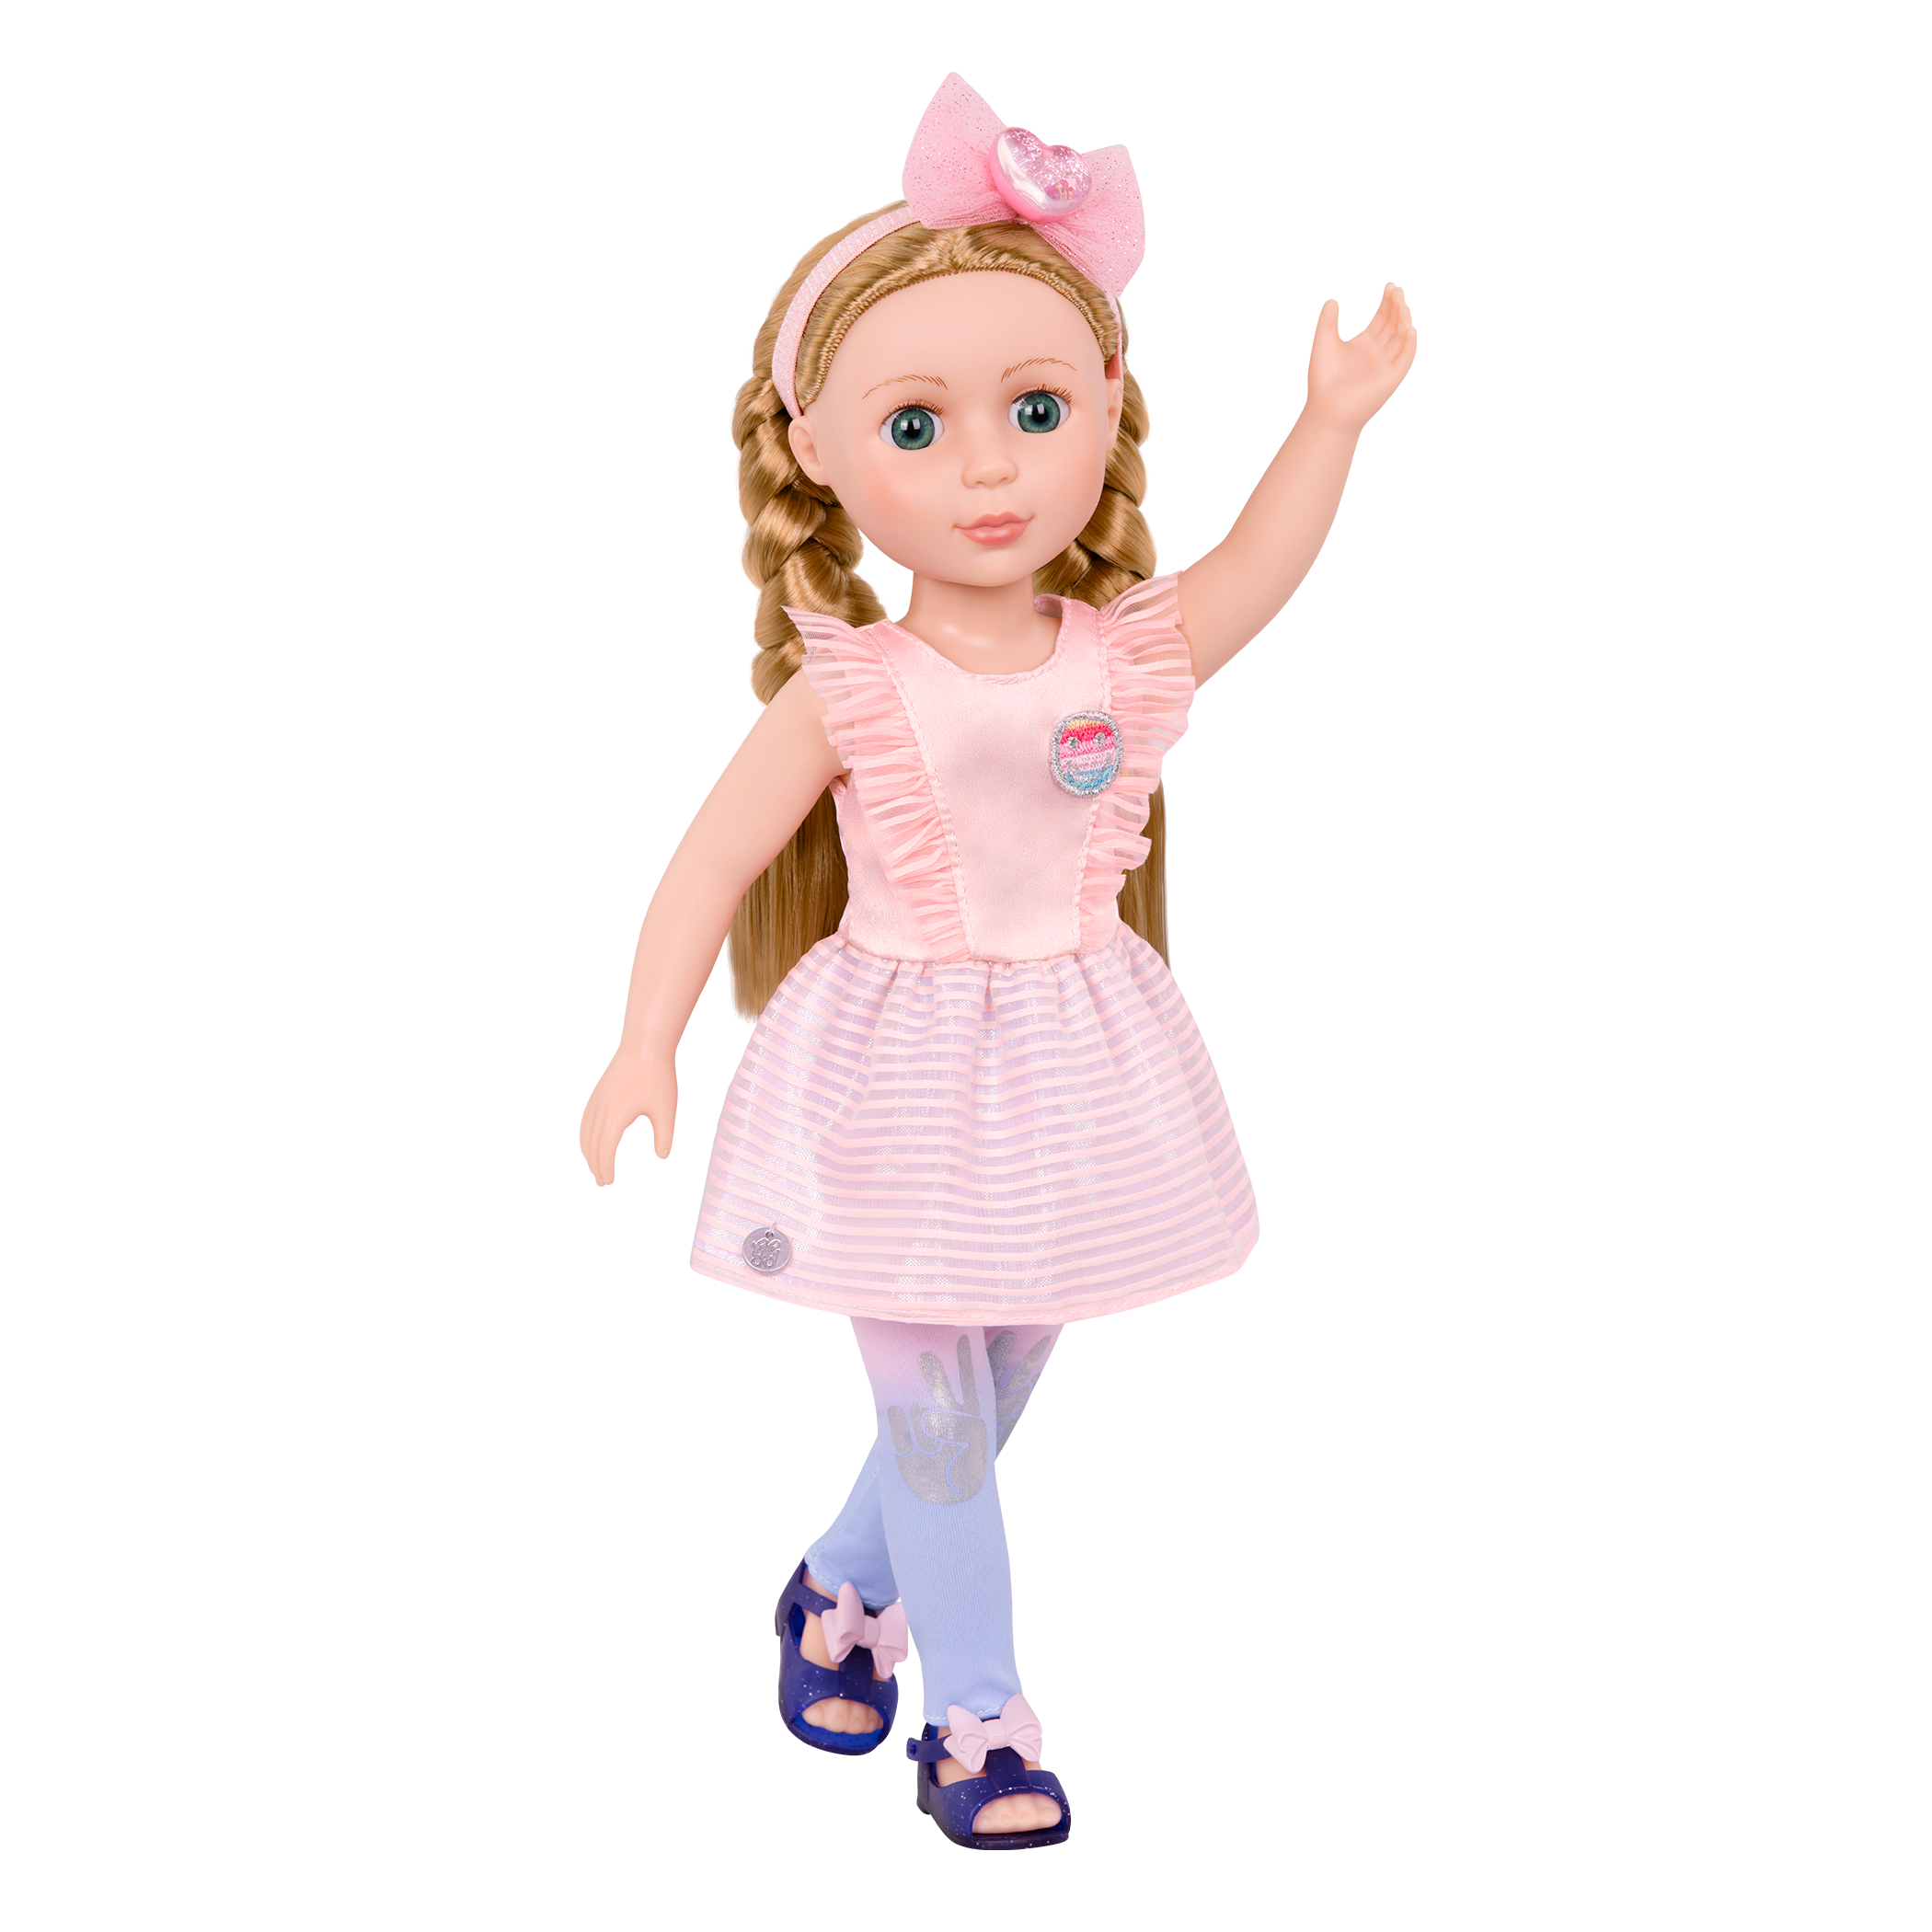  Glitter Girls - Odessa 14-inch Poseable Fashion Doll - Dolls  for Girls Age 3 & Up : Toys & Games